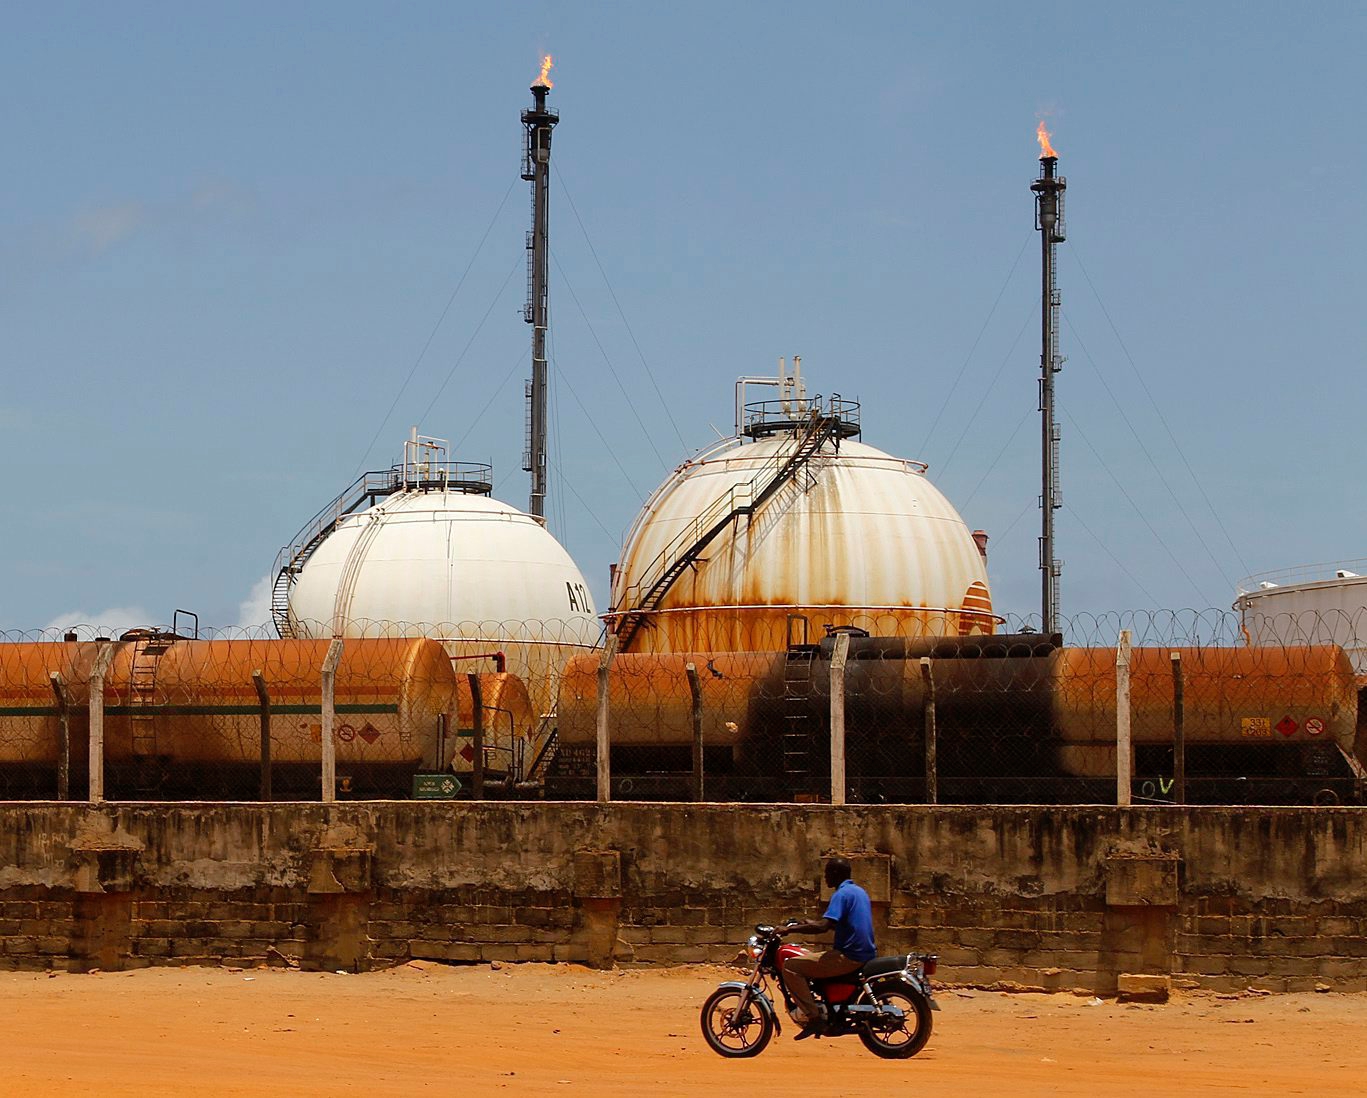 epa05281730 A photograph made available 28 April 2016 shows a motorcyclist riding in front of the Ivorien Society of Refinage facility (Société Ivoirienne de Refinage (SIR) in Abidjan, Ivory Coast 26 April 2016. According to global energy consultancy group Wood Mackenzie Africa's place as a significant producer and net exporter of oil in the world is forecast to grow to 15 per cent by 2020 due to new discoveries in West Africa. Substantial growth potential exists in West Africa with 40 billion barrels of discovered but undeveloped reserves and 55 billion barrels of yet-to-find oil. Since Jubilee discovery in 2007 companies are exploring other parts of the region between Ghana to Mauritania looking for analogous Cretaceous turbidite prospects. Offshore explorations in Sierra Leone and the Ivory Coast are high potential areas for investment beyond that of Nigeria and Angola.  EPA/LEGNAN KOULA ELFENBEINKUESTE BENZIN